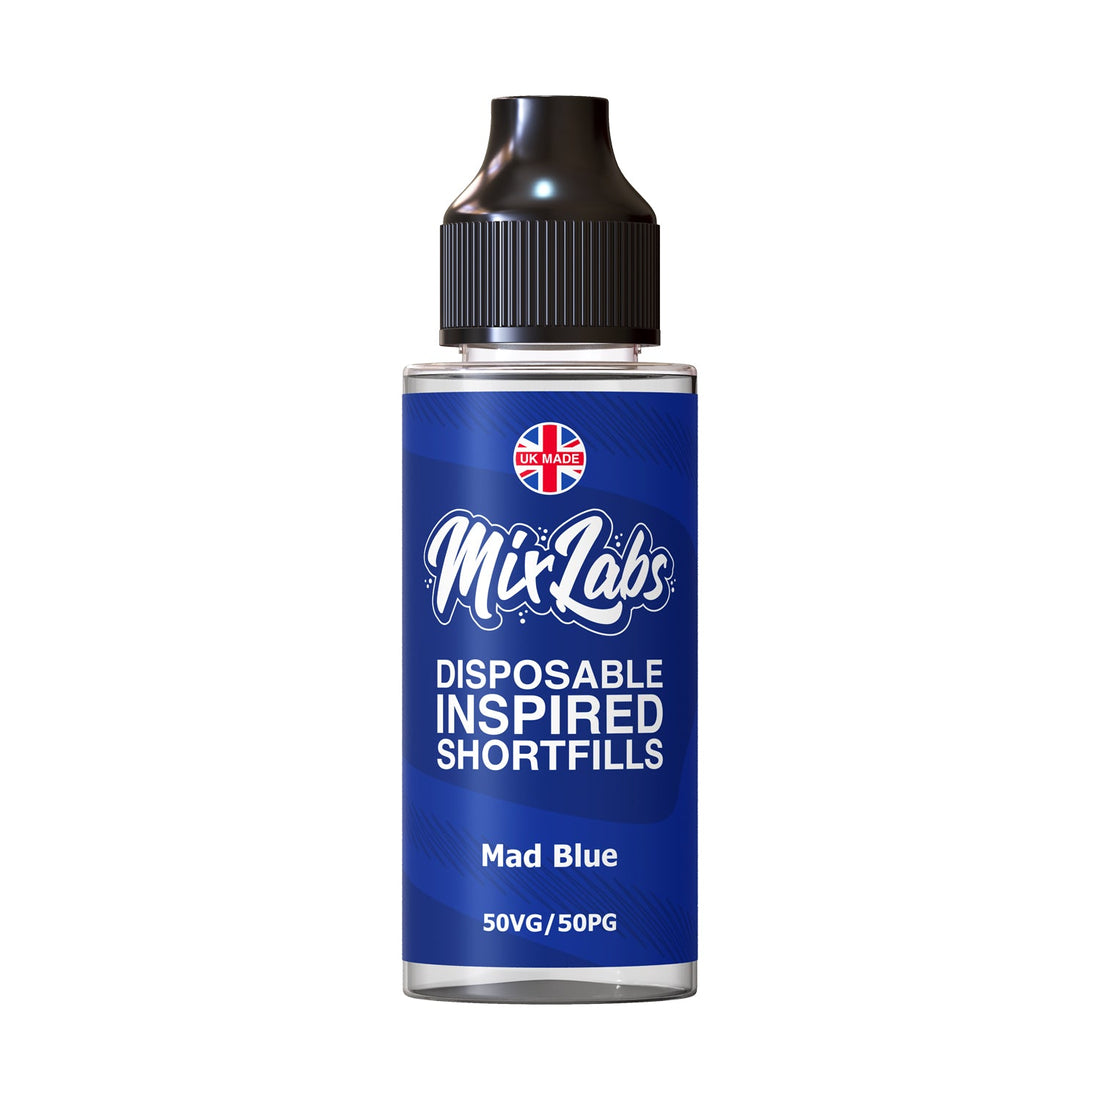 Mad Blue Shortfill by Mix Labs. - 100ml-Supergood.